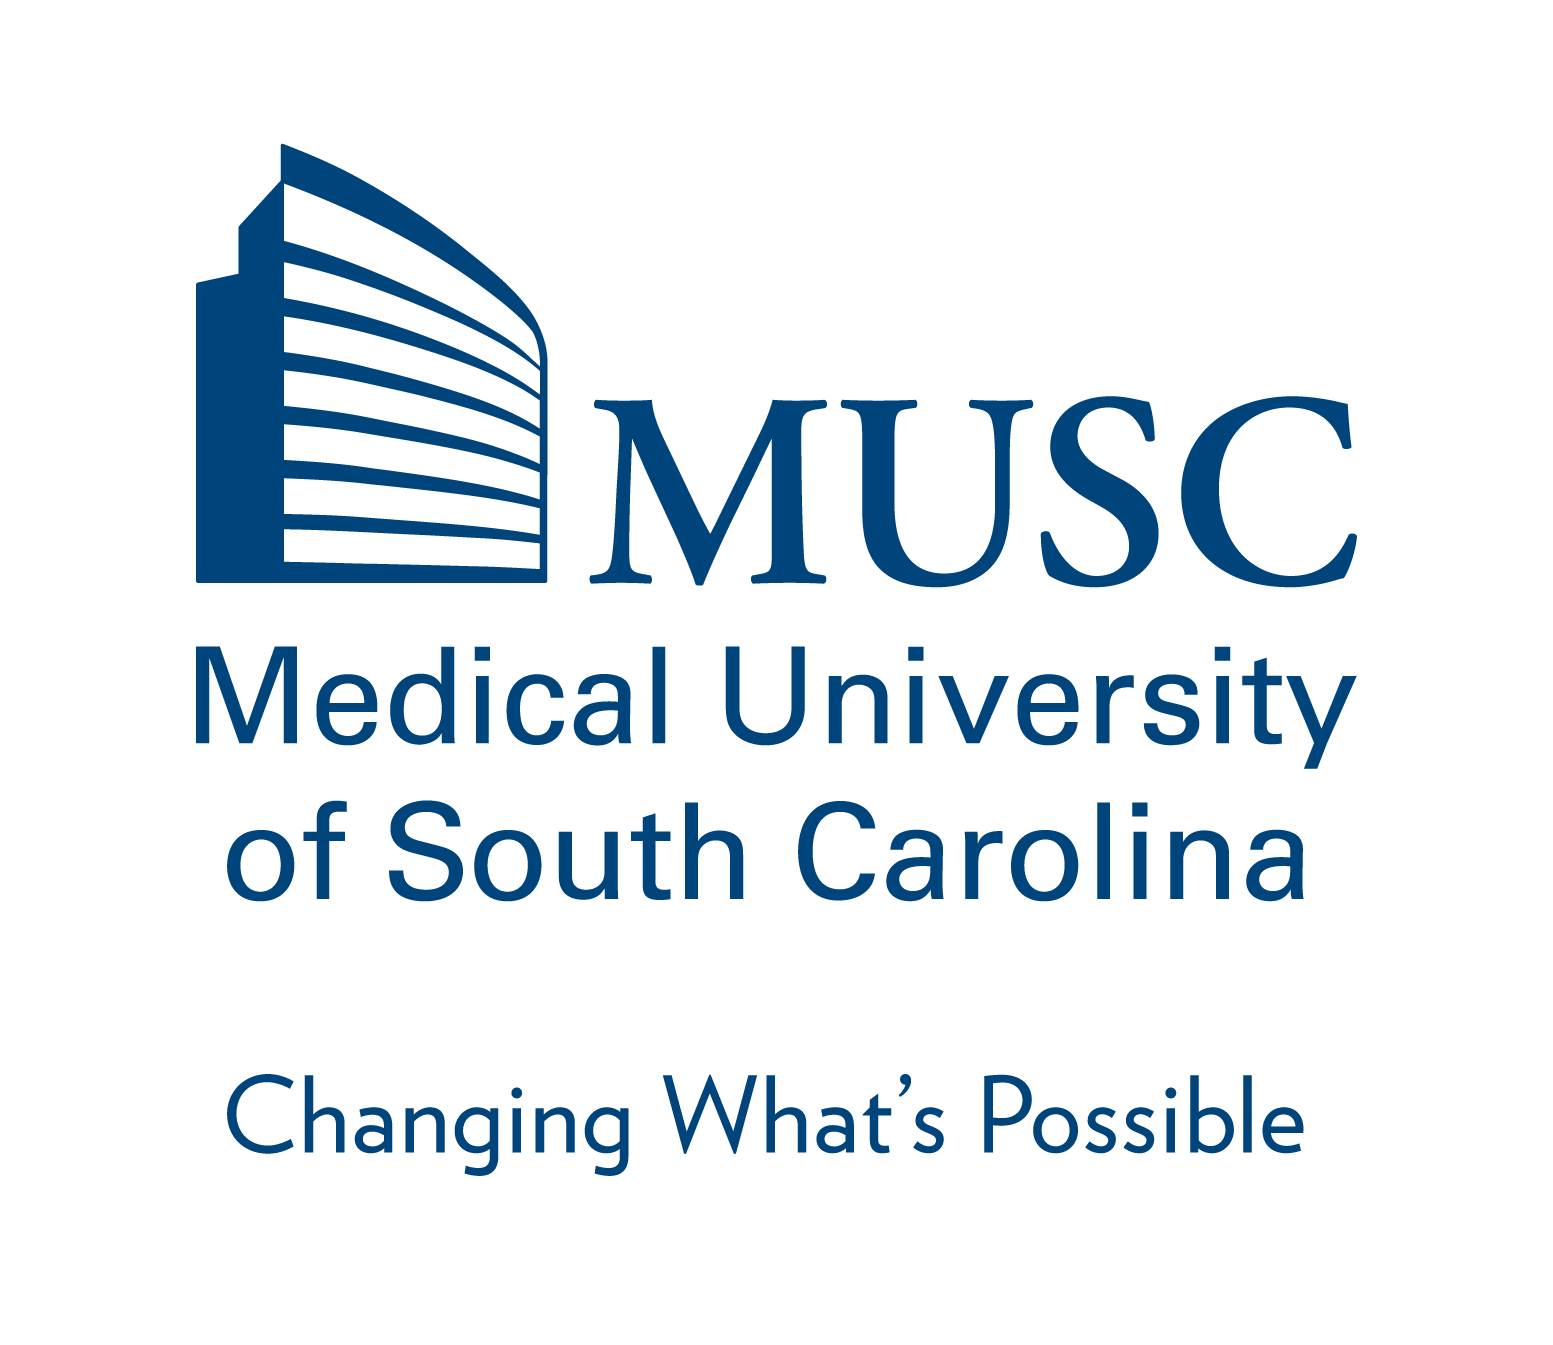 Logo for the Medical University of South Carolina with the tagline - Changing What's Possible